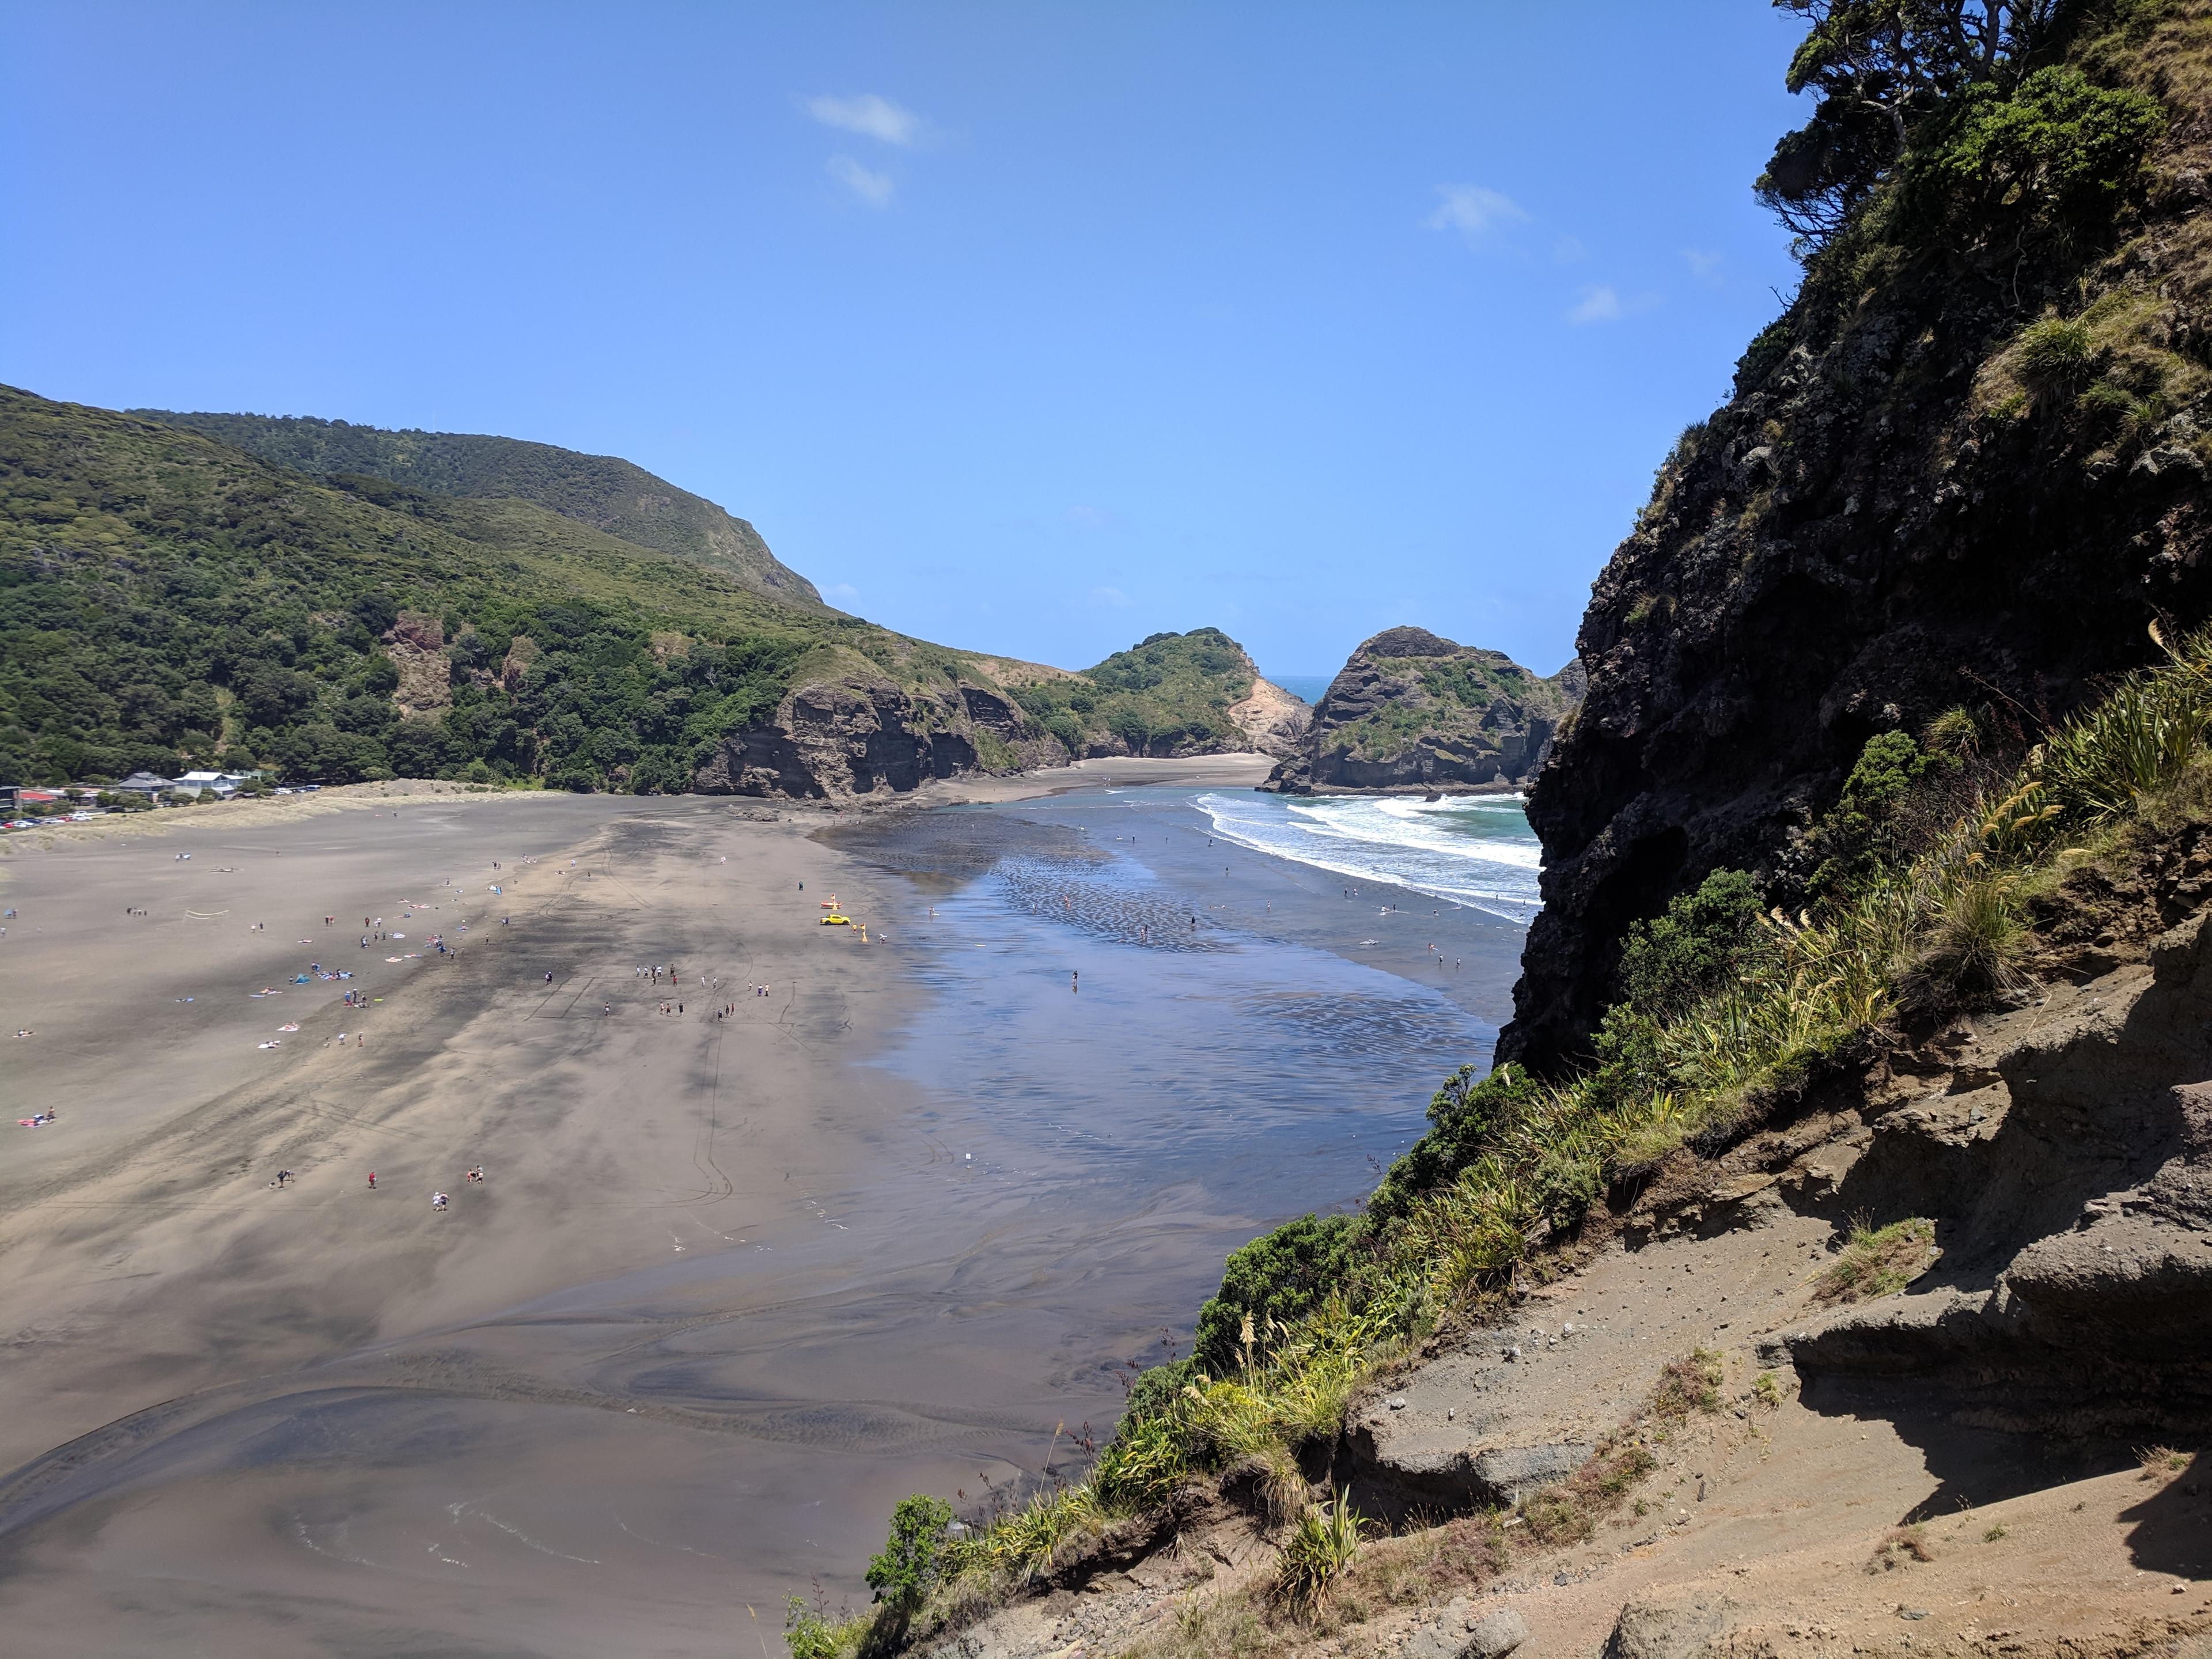 The other side of Piha beach from Lion’s Rock